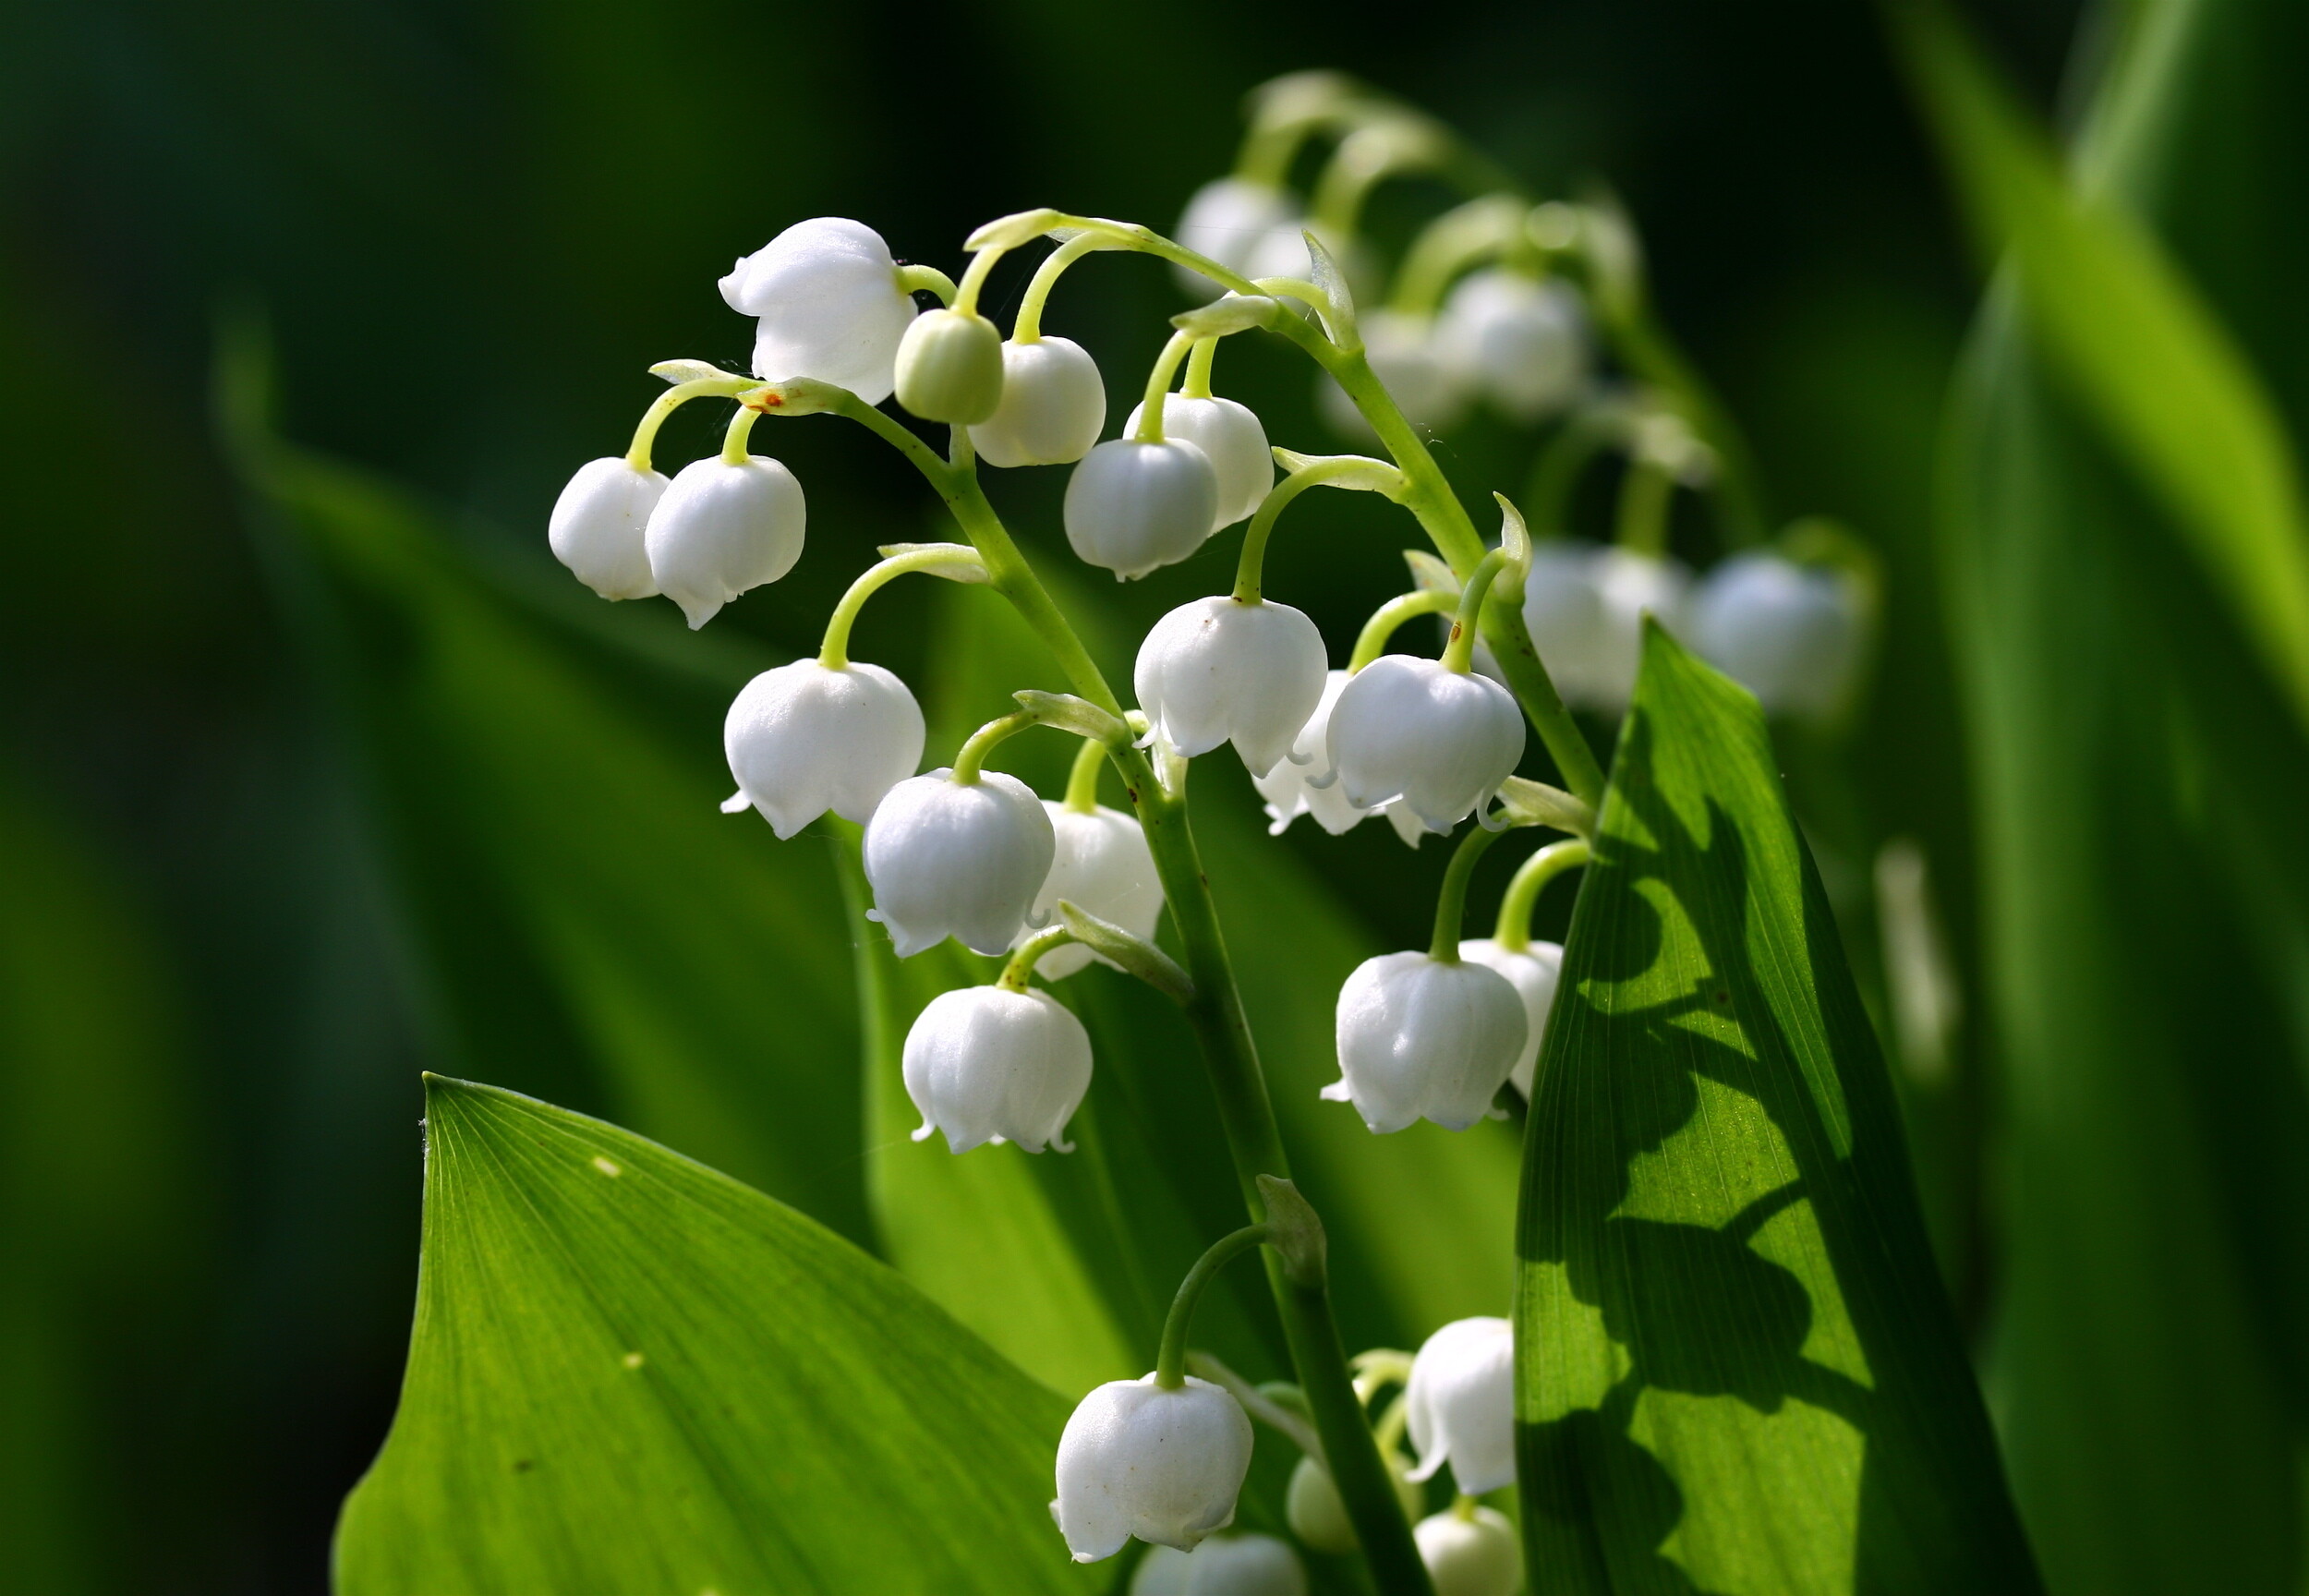 Lily of the Valley: Convallaria majalis is widely grown in gardens for its scented flowers and ground-covering abilities in shady locations. 2500x1730 HD Wallpaper.